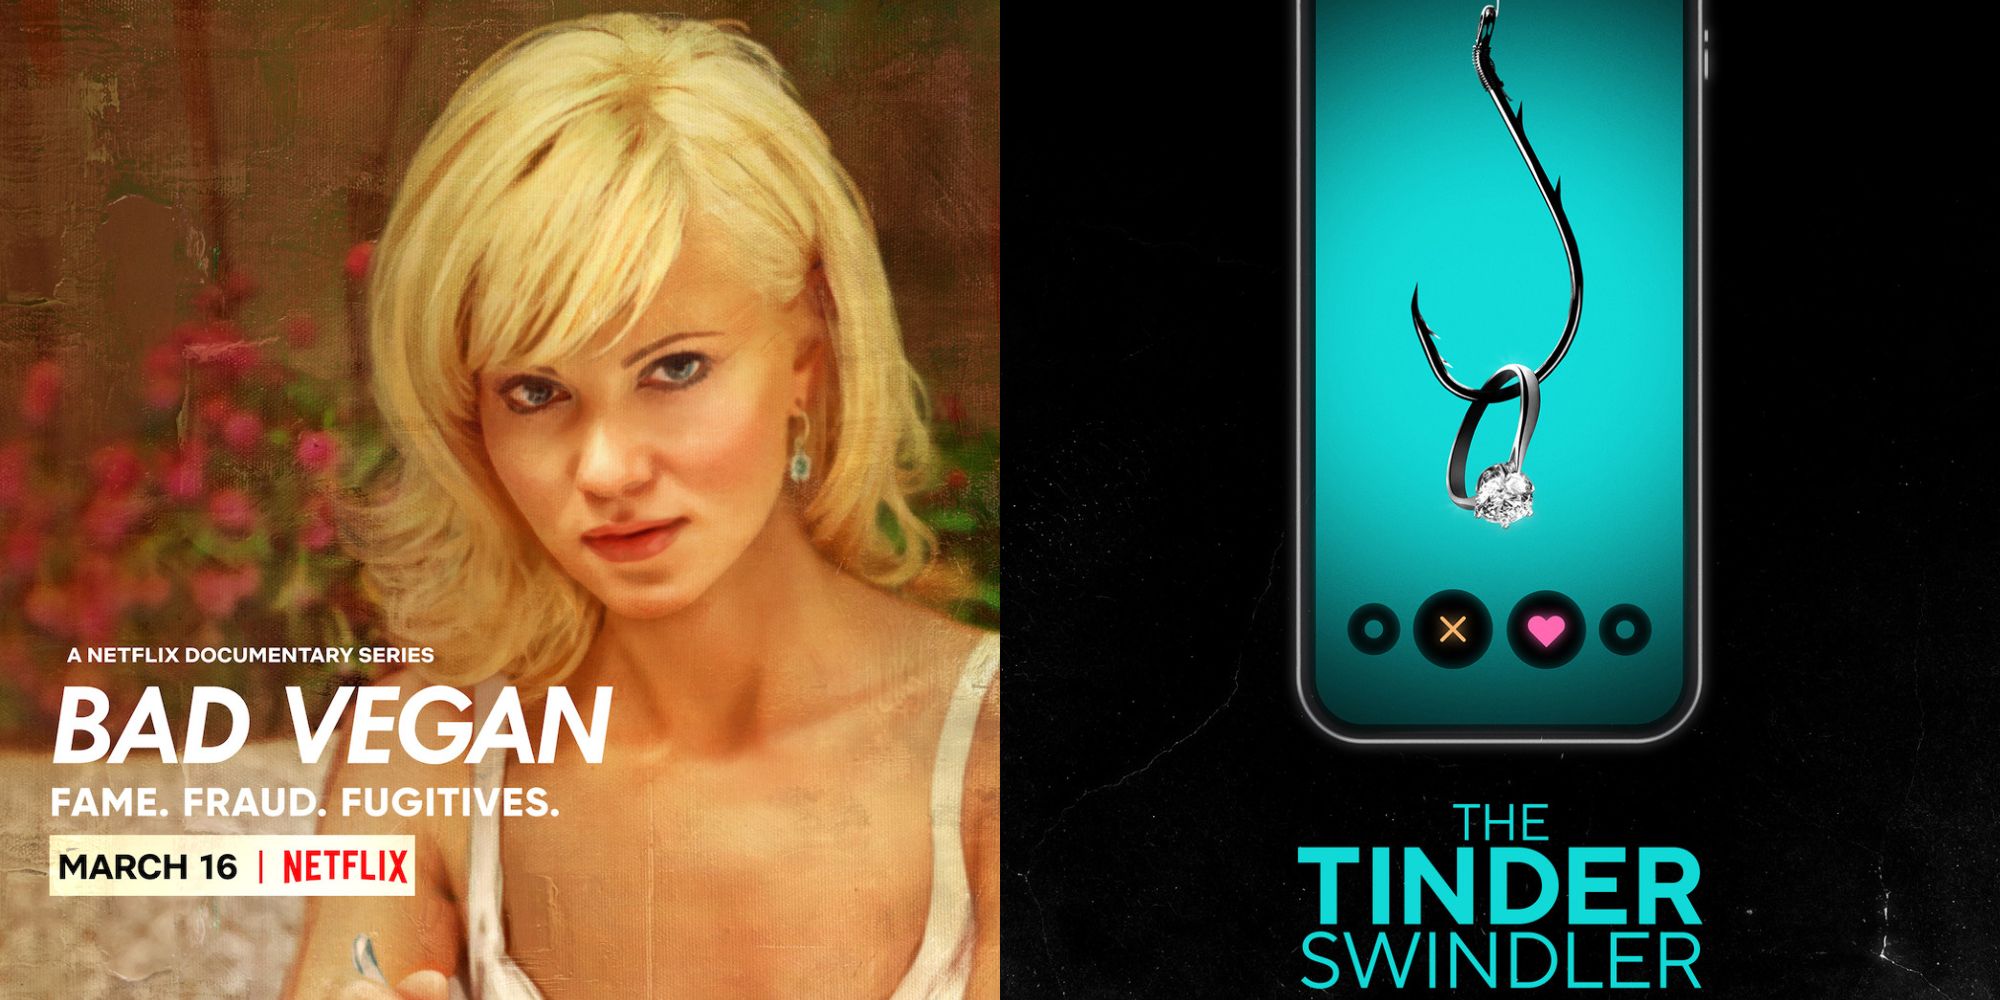 Split image showing the posters for Bad Vegan and The Tinder Swindler.